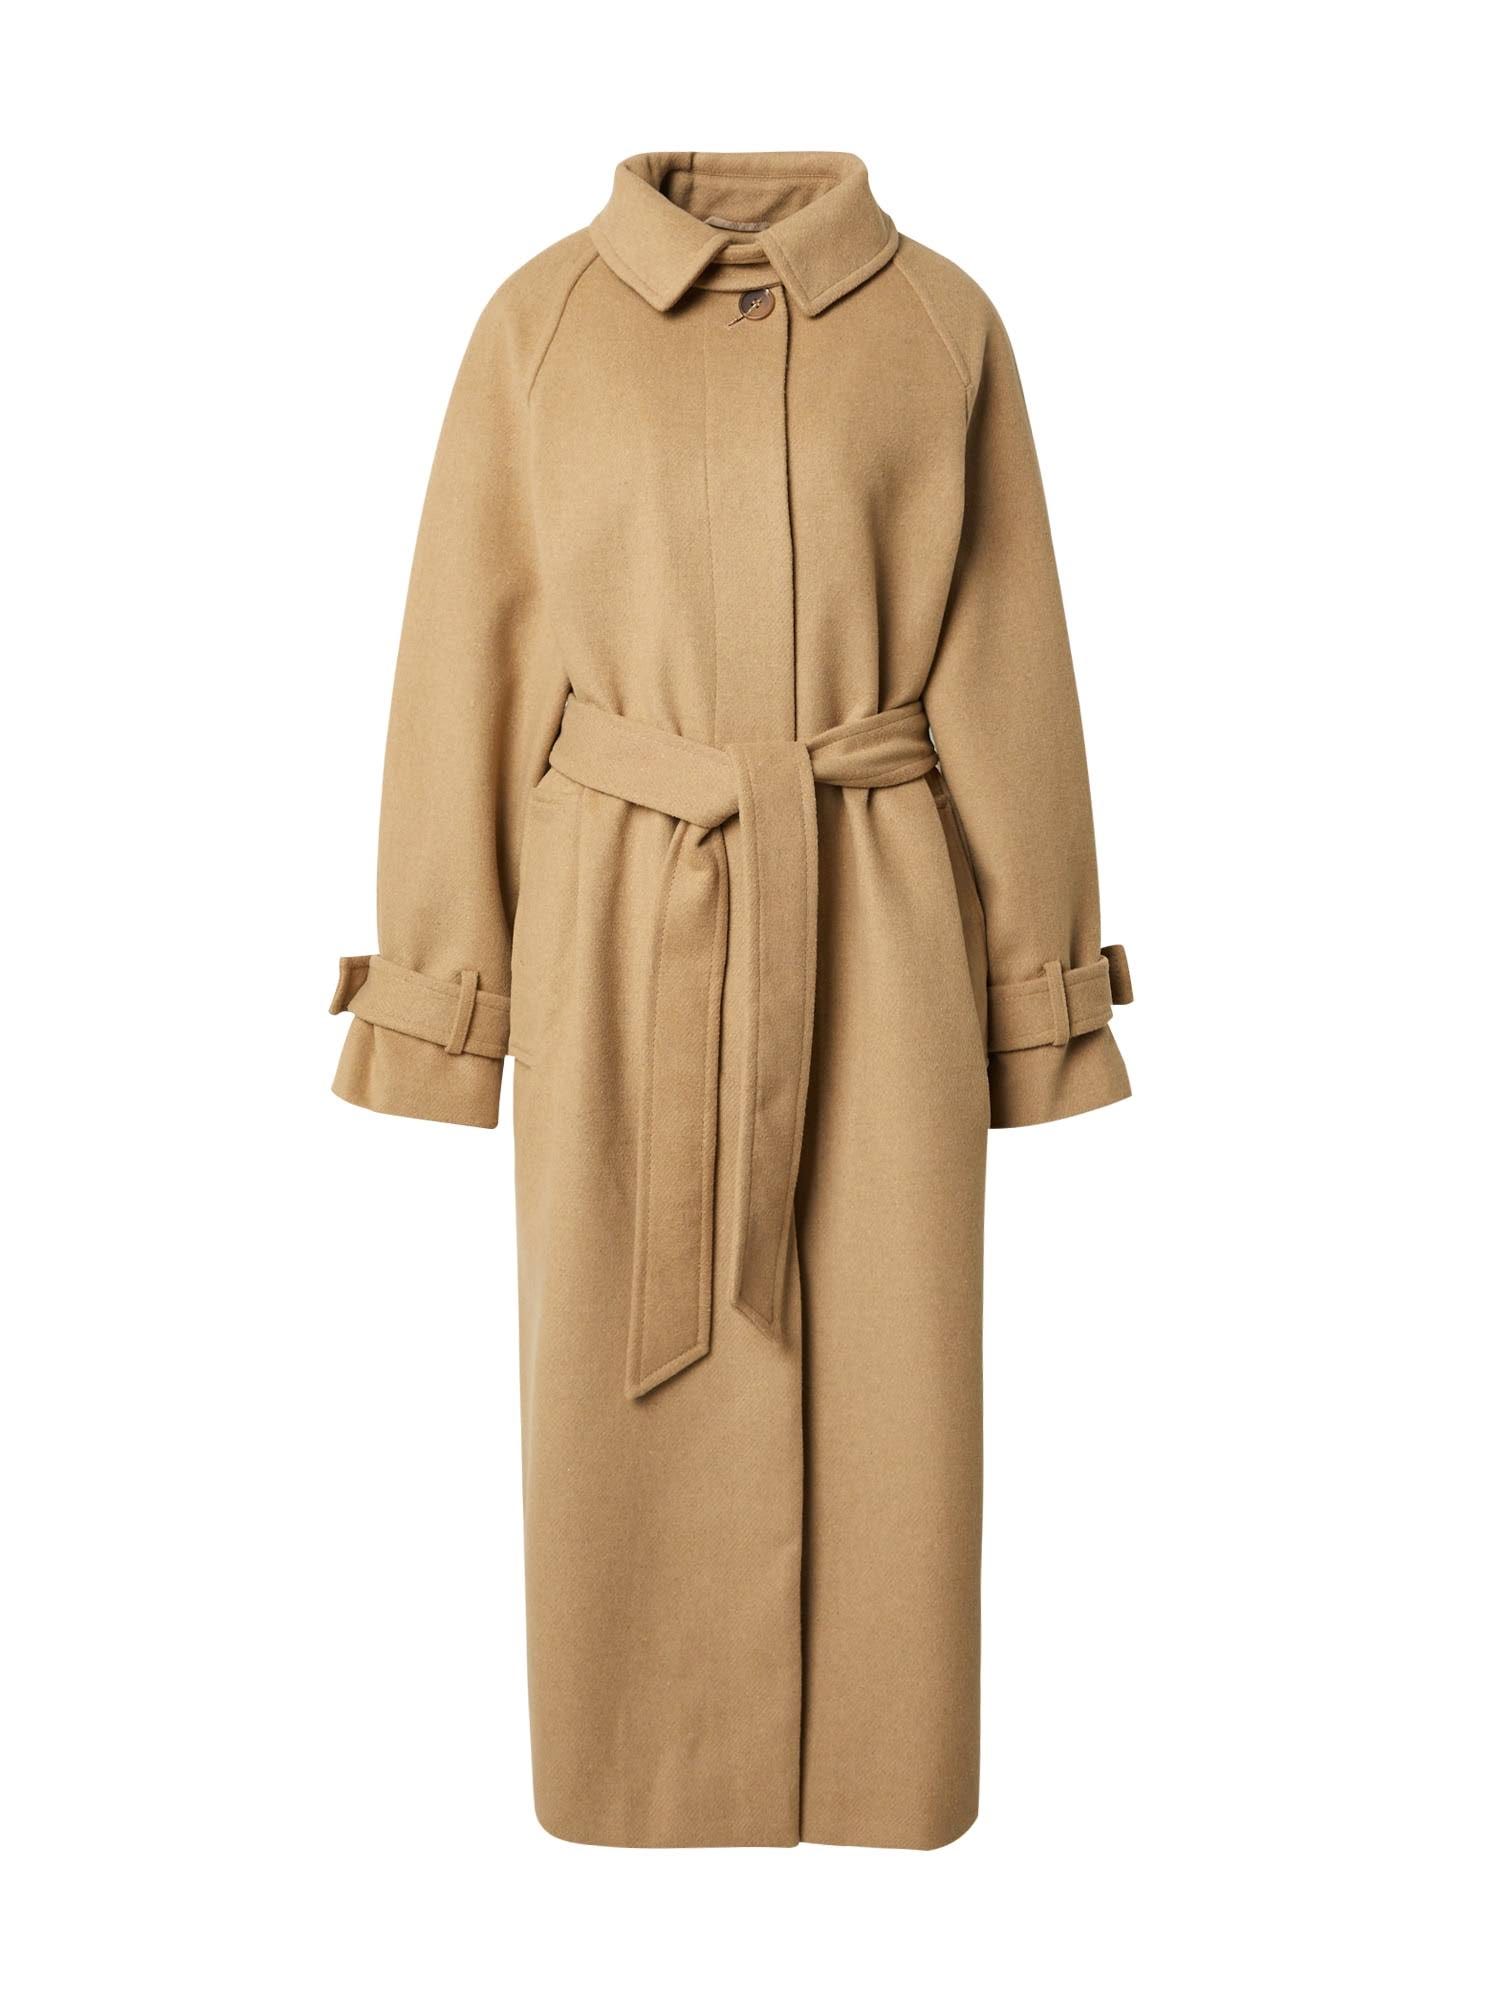 Stylish Topshop Tan Trench Coat with Polyester Lining | Image